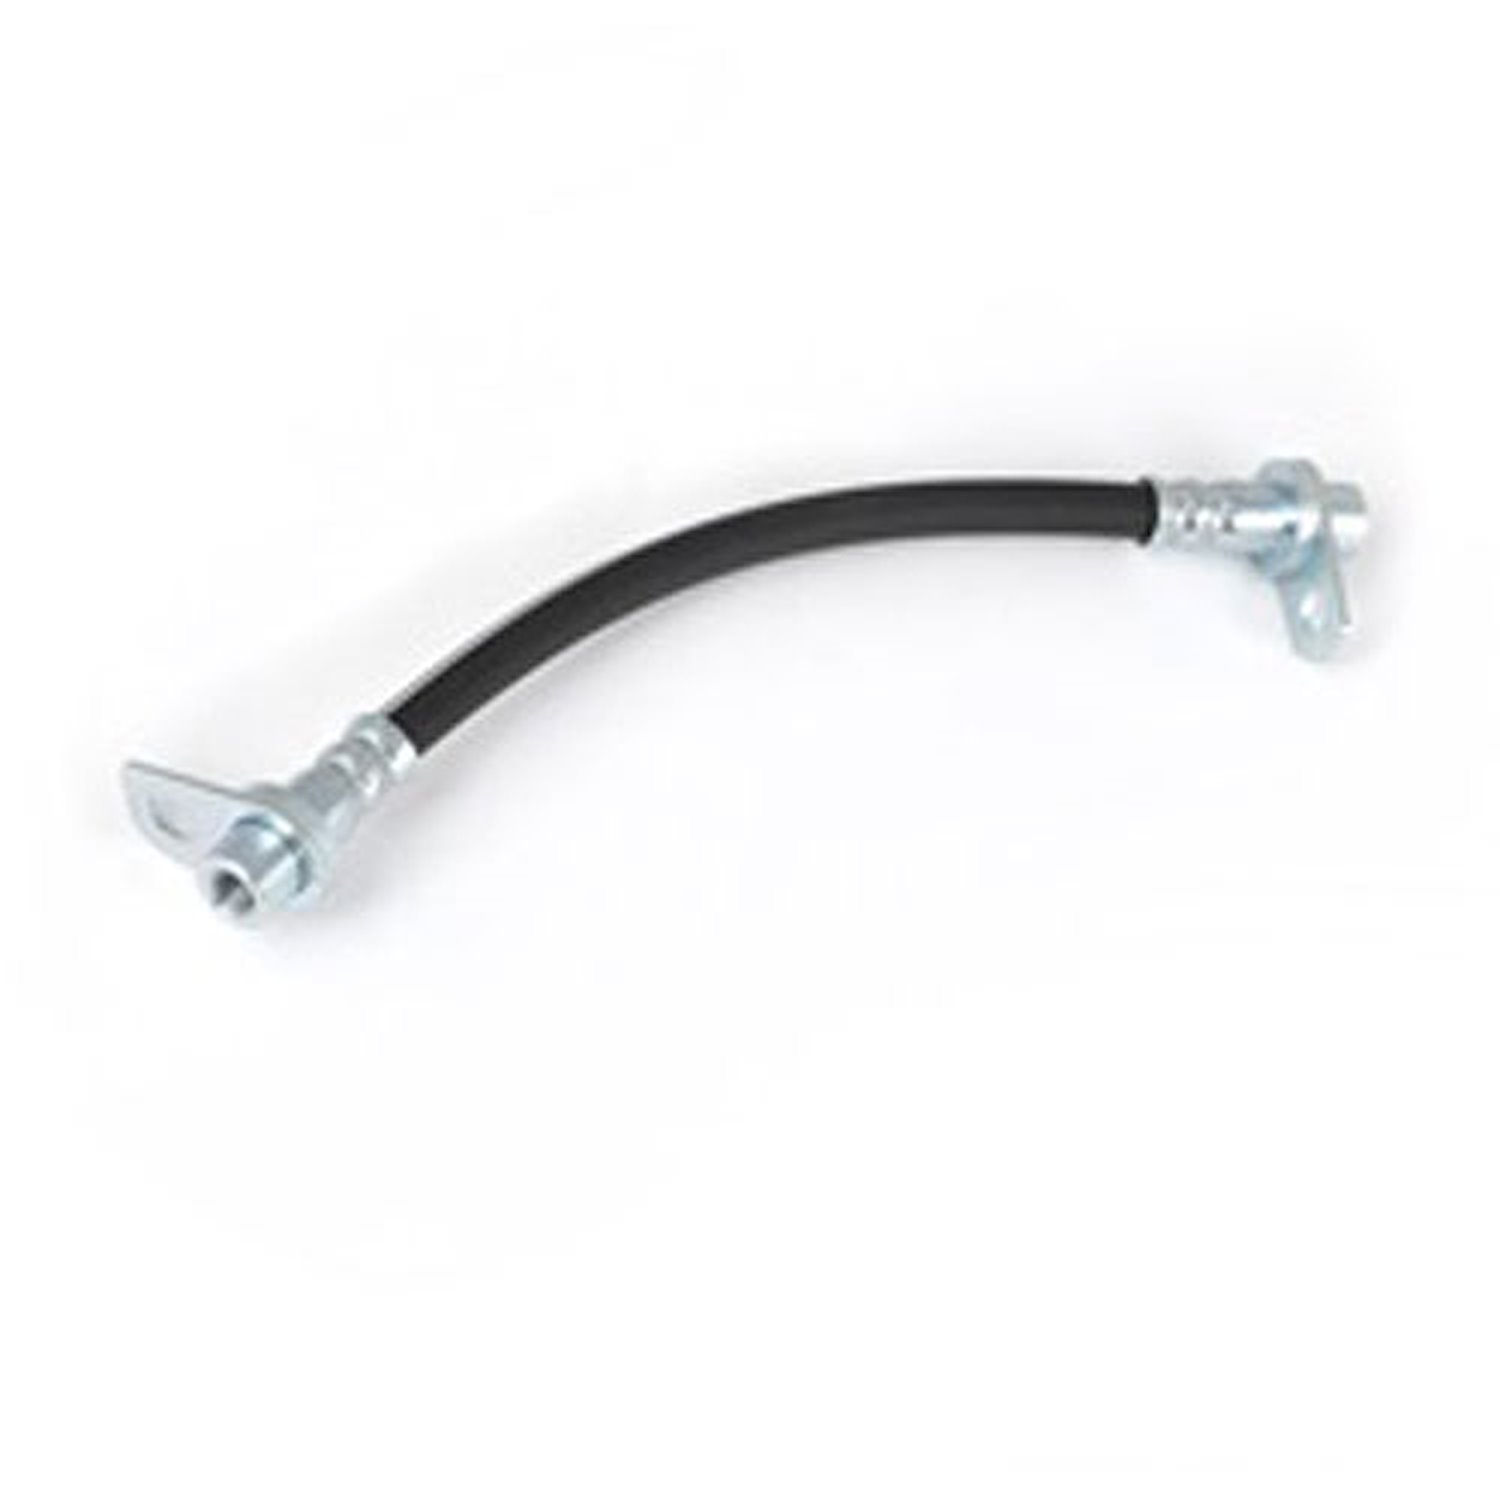 This right rear brake hose from Omix-ADA fits 07-13 Jeep Compass and Patriots with rear disc brakes.